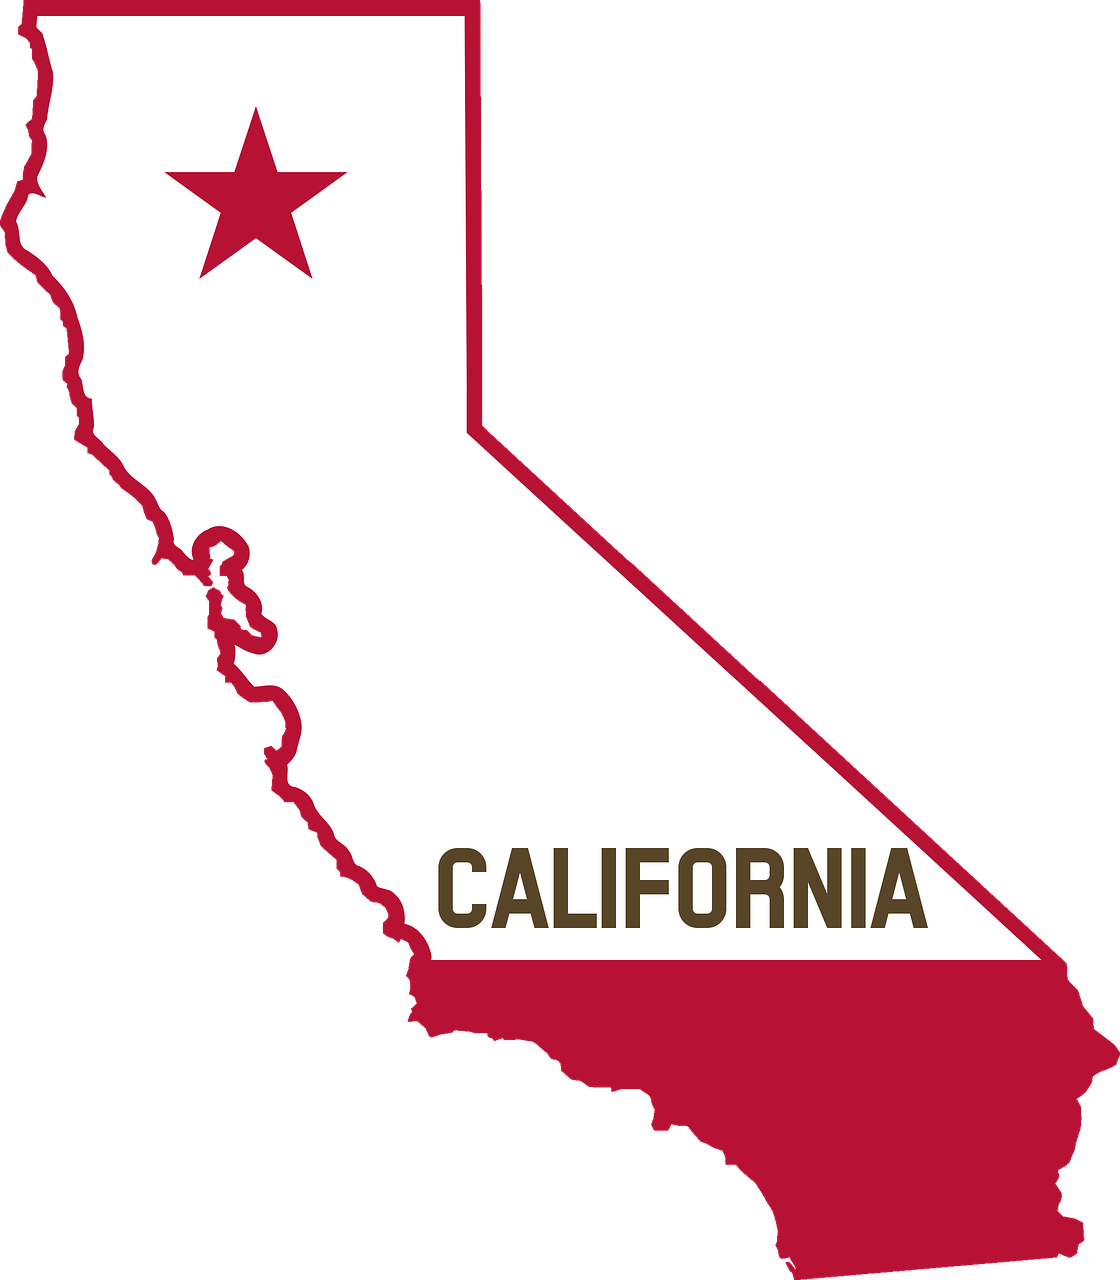 state of claifornia outlined in red with a star